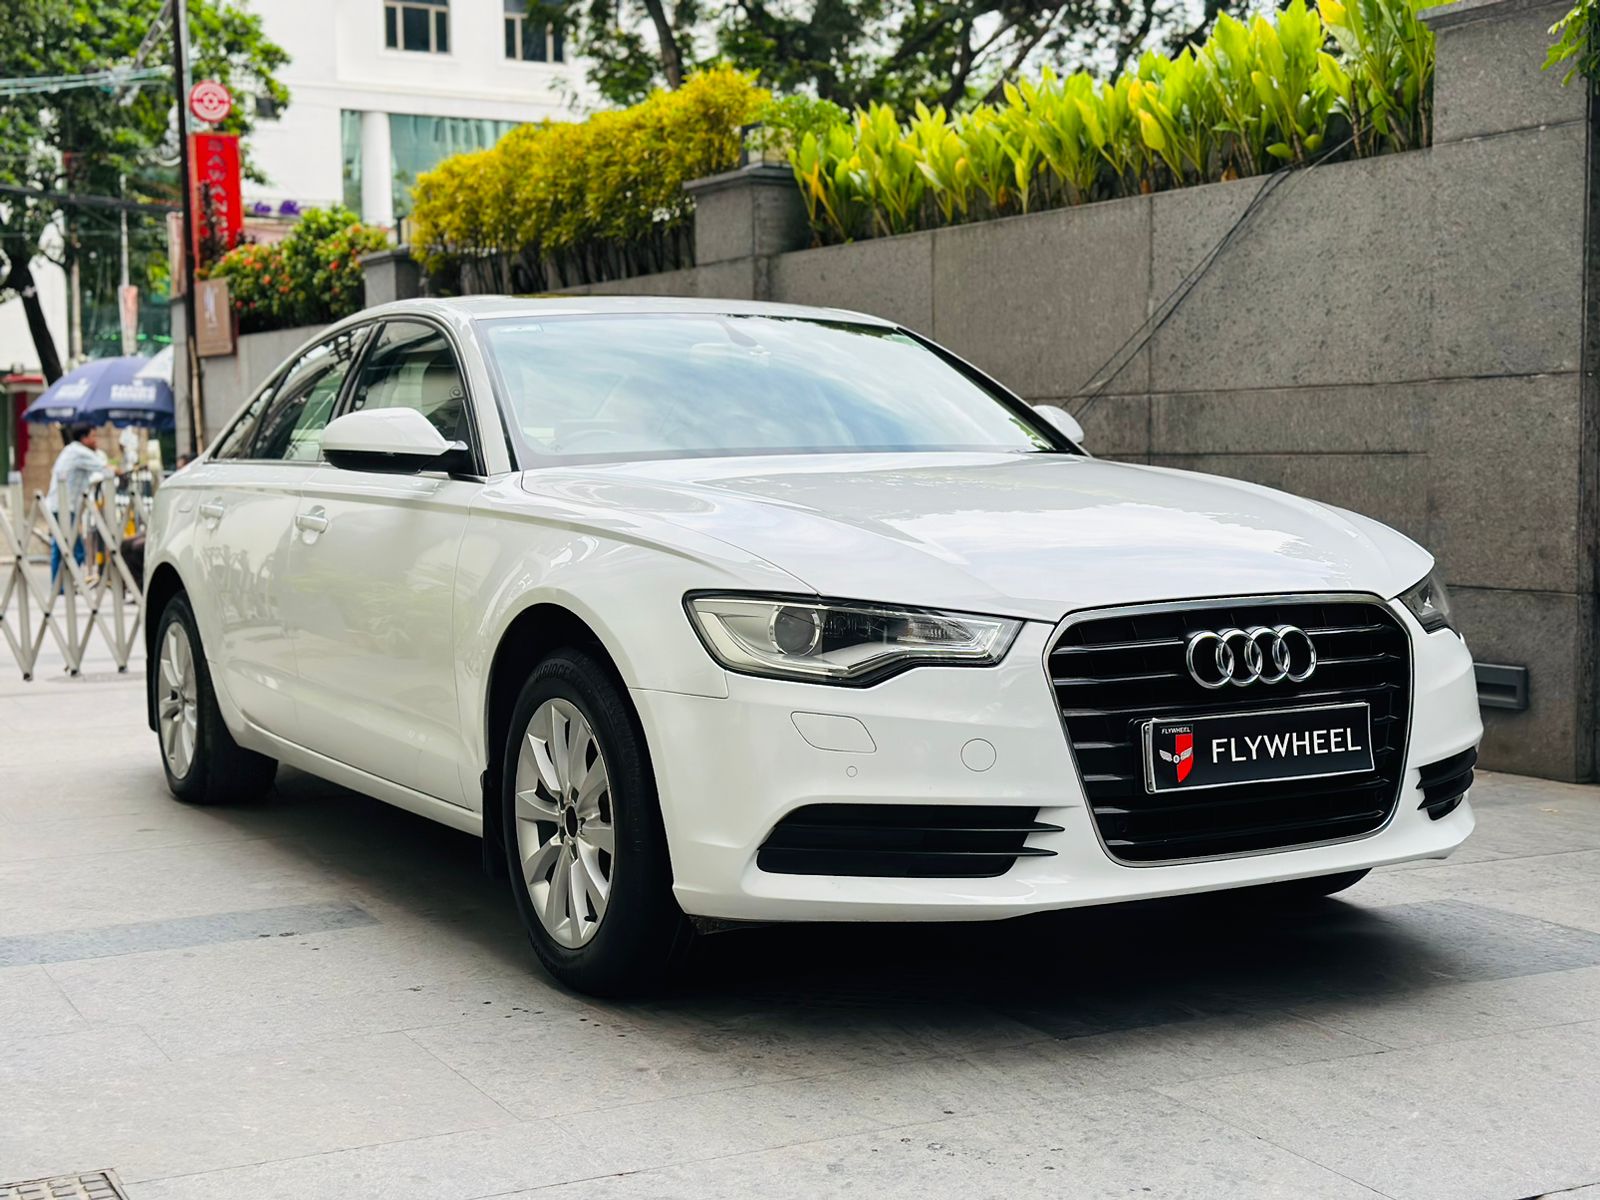 The 2013 Audi A6 2.0 TDI: Luxury and Efficiency Combined